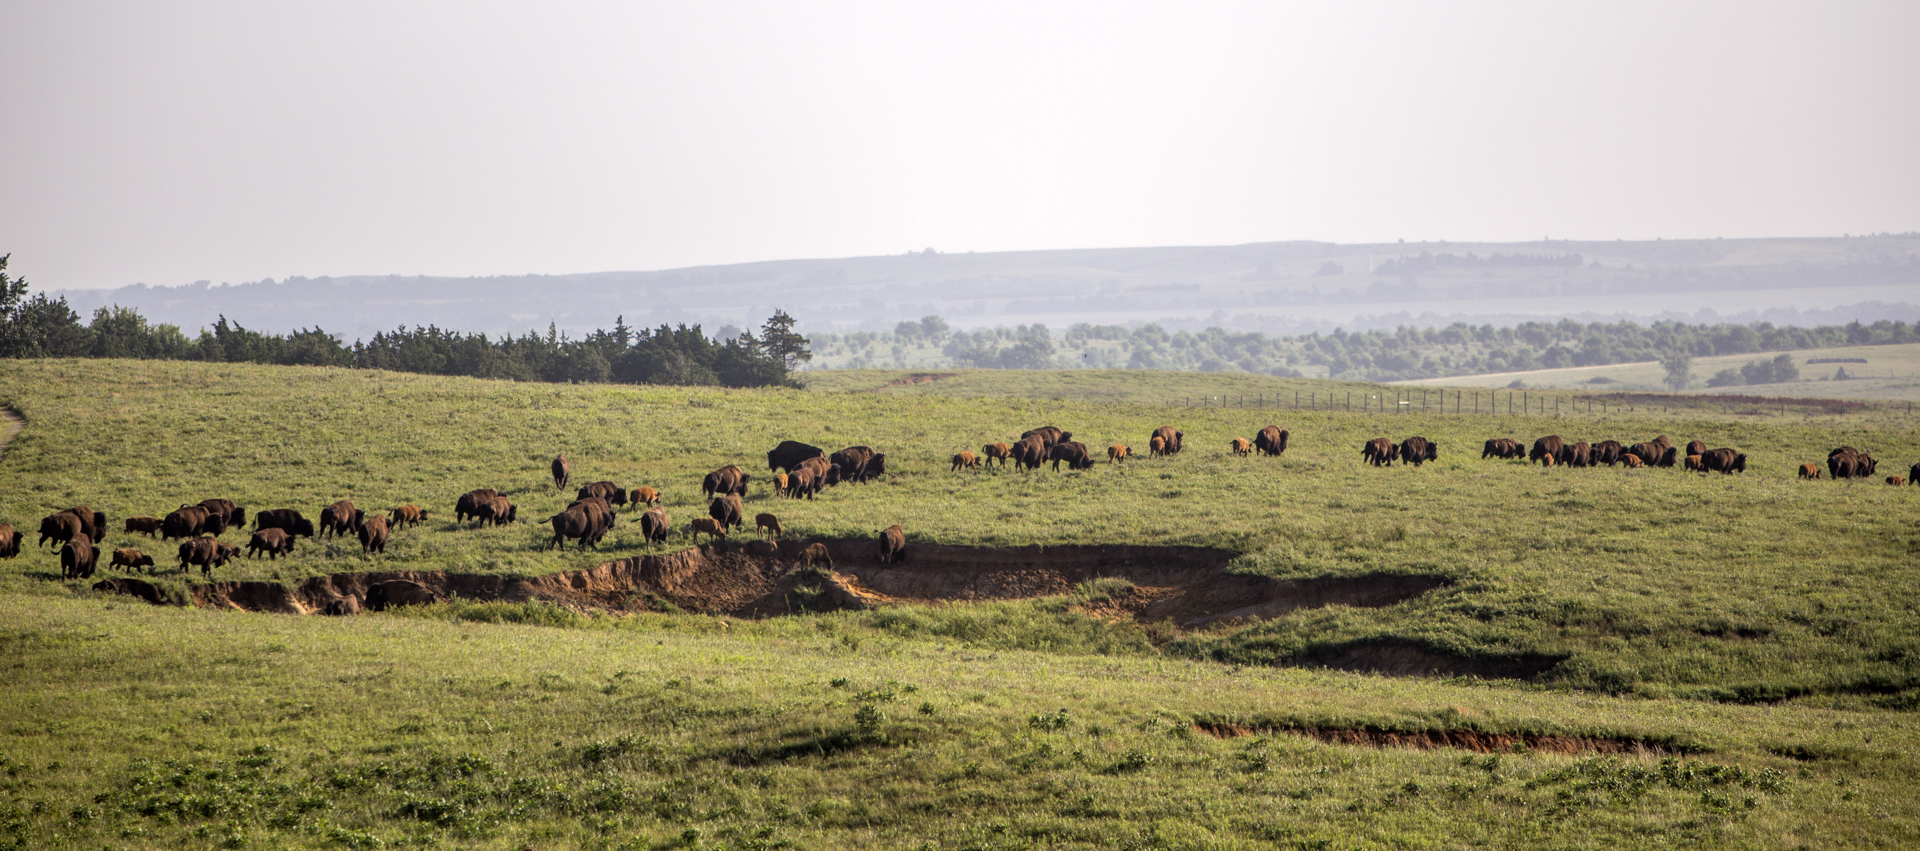 American bison herd on the move